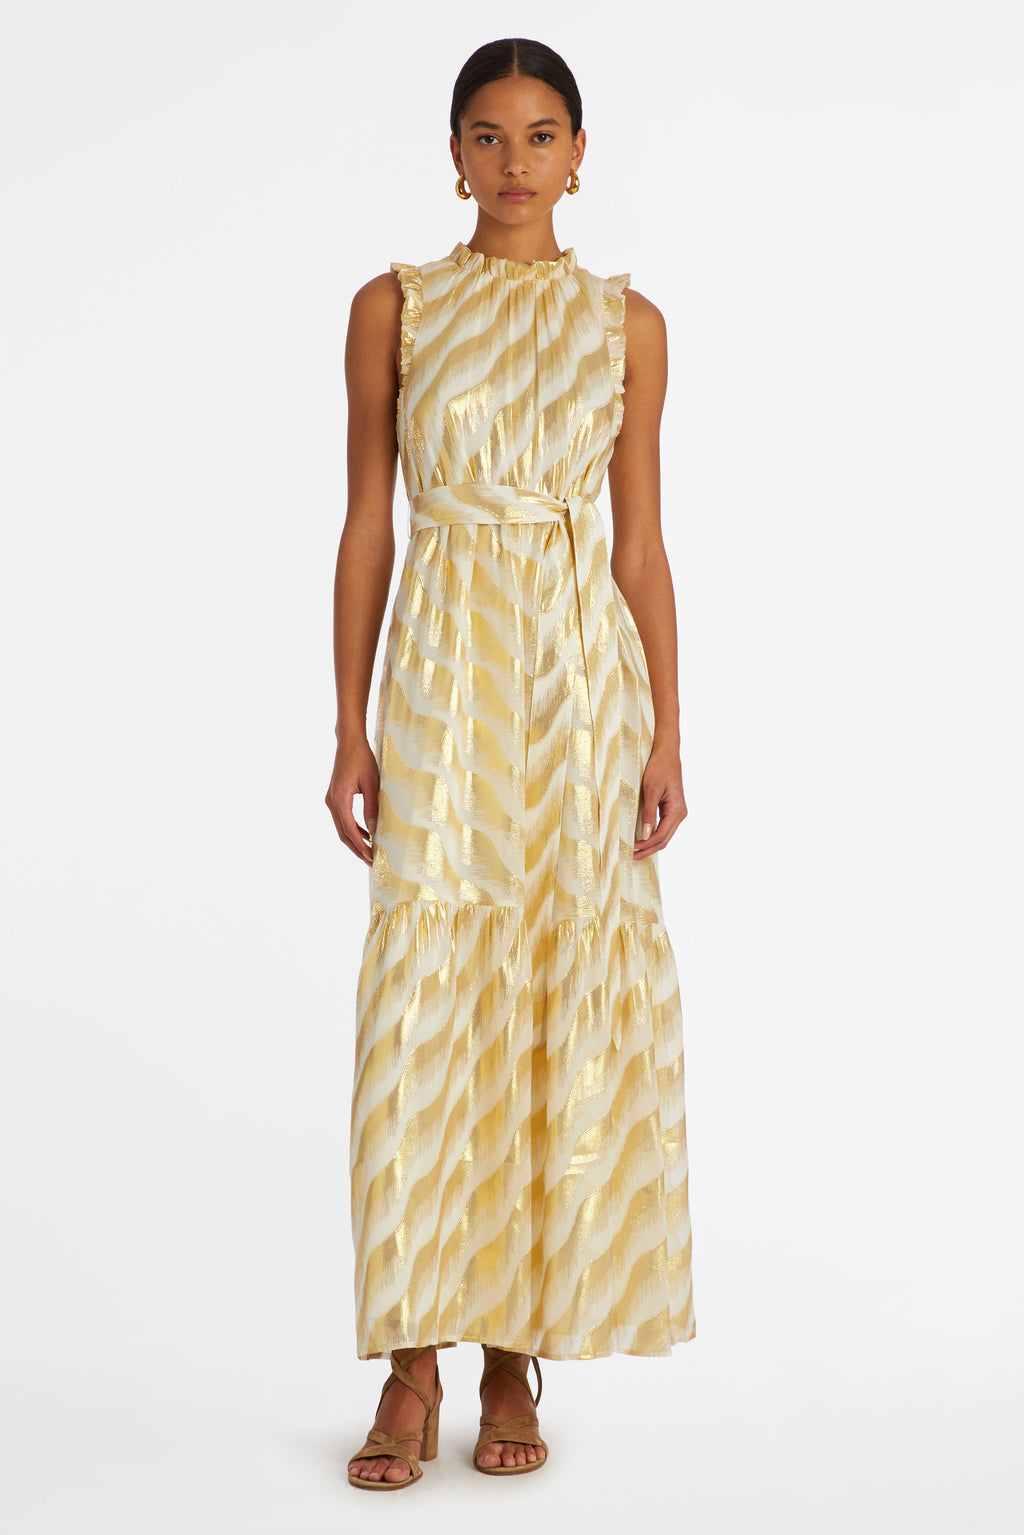 Maxi dress with a high detailed neckline in a gold and white striped print